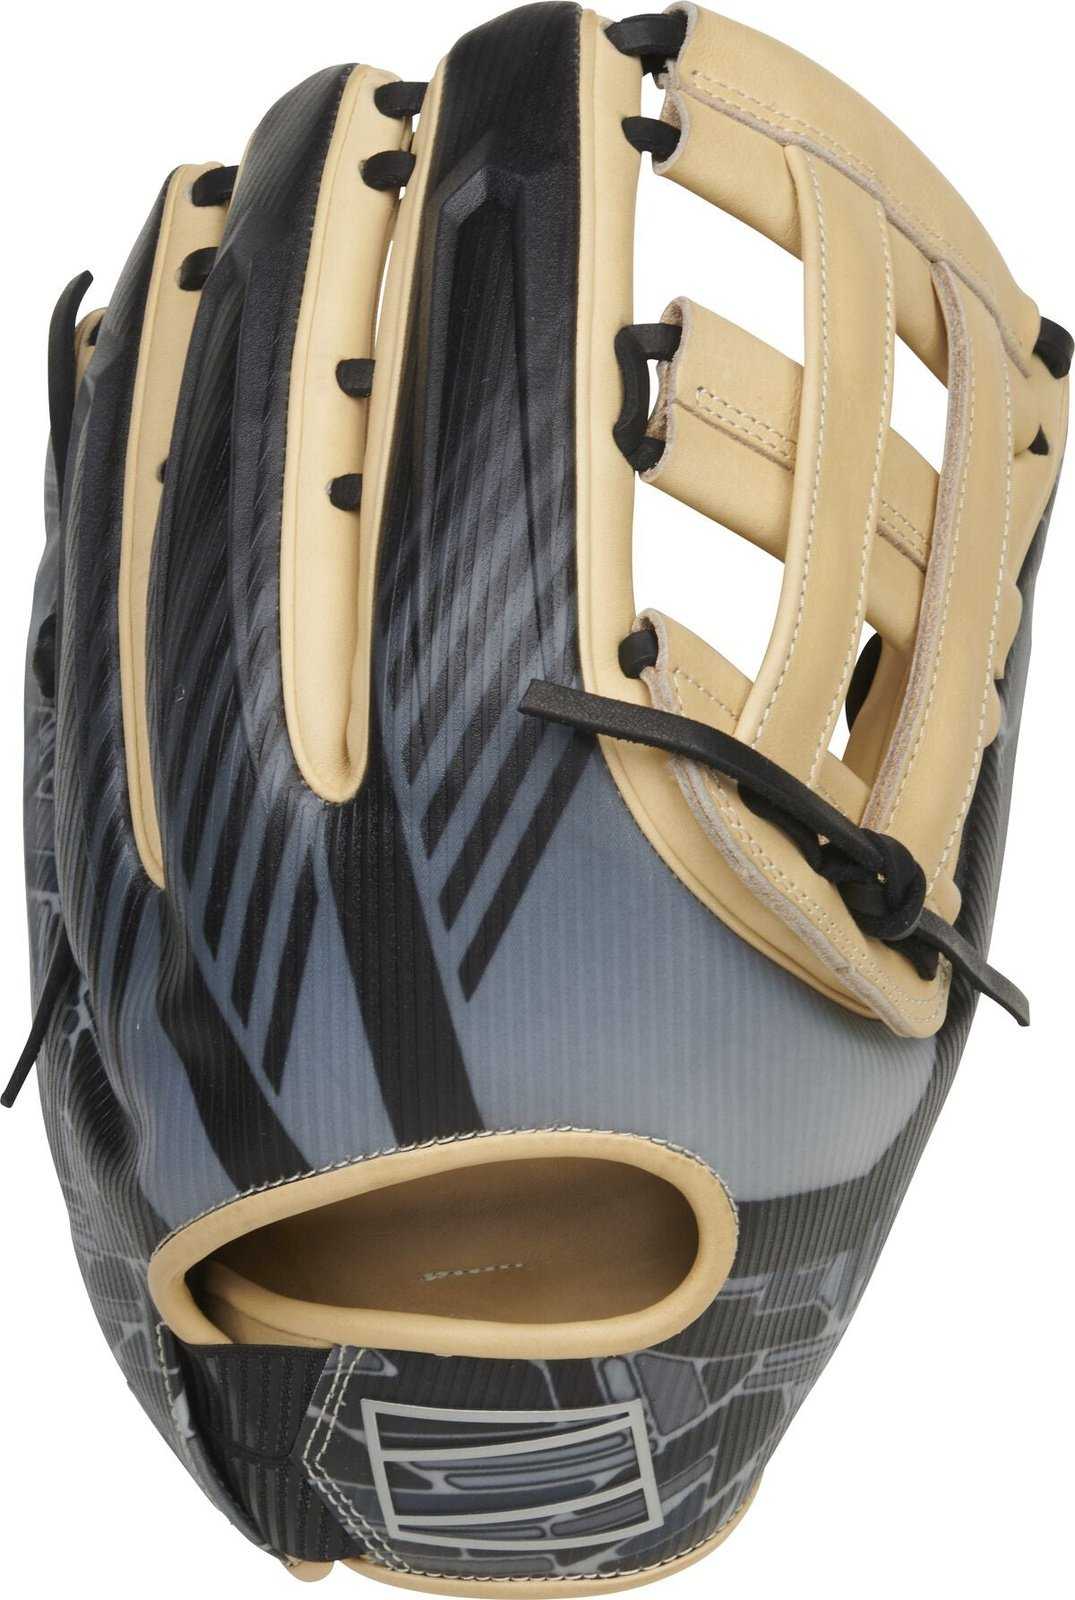 Rawlings 2022 REV1X 12.75" Outfield Glove - Cork Gray - HIT a Double